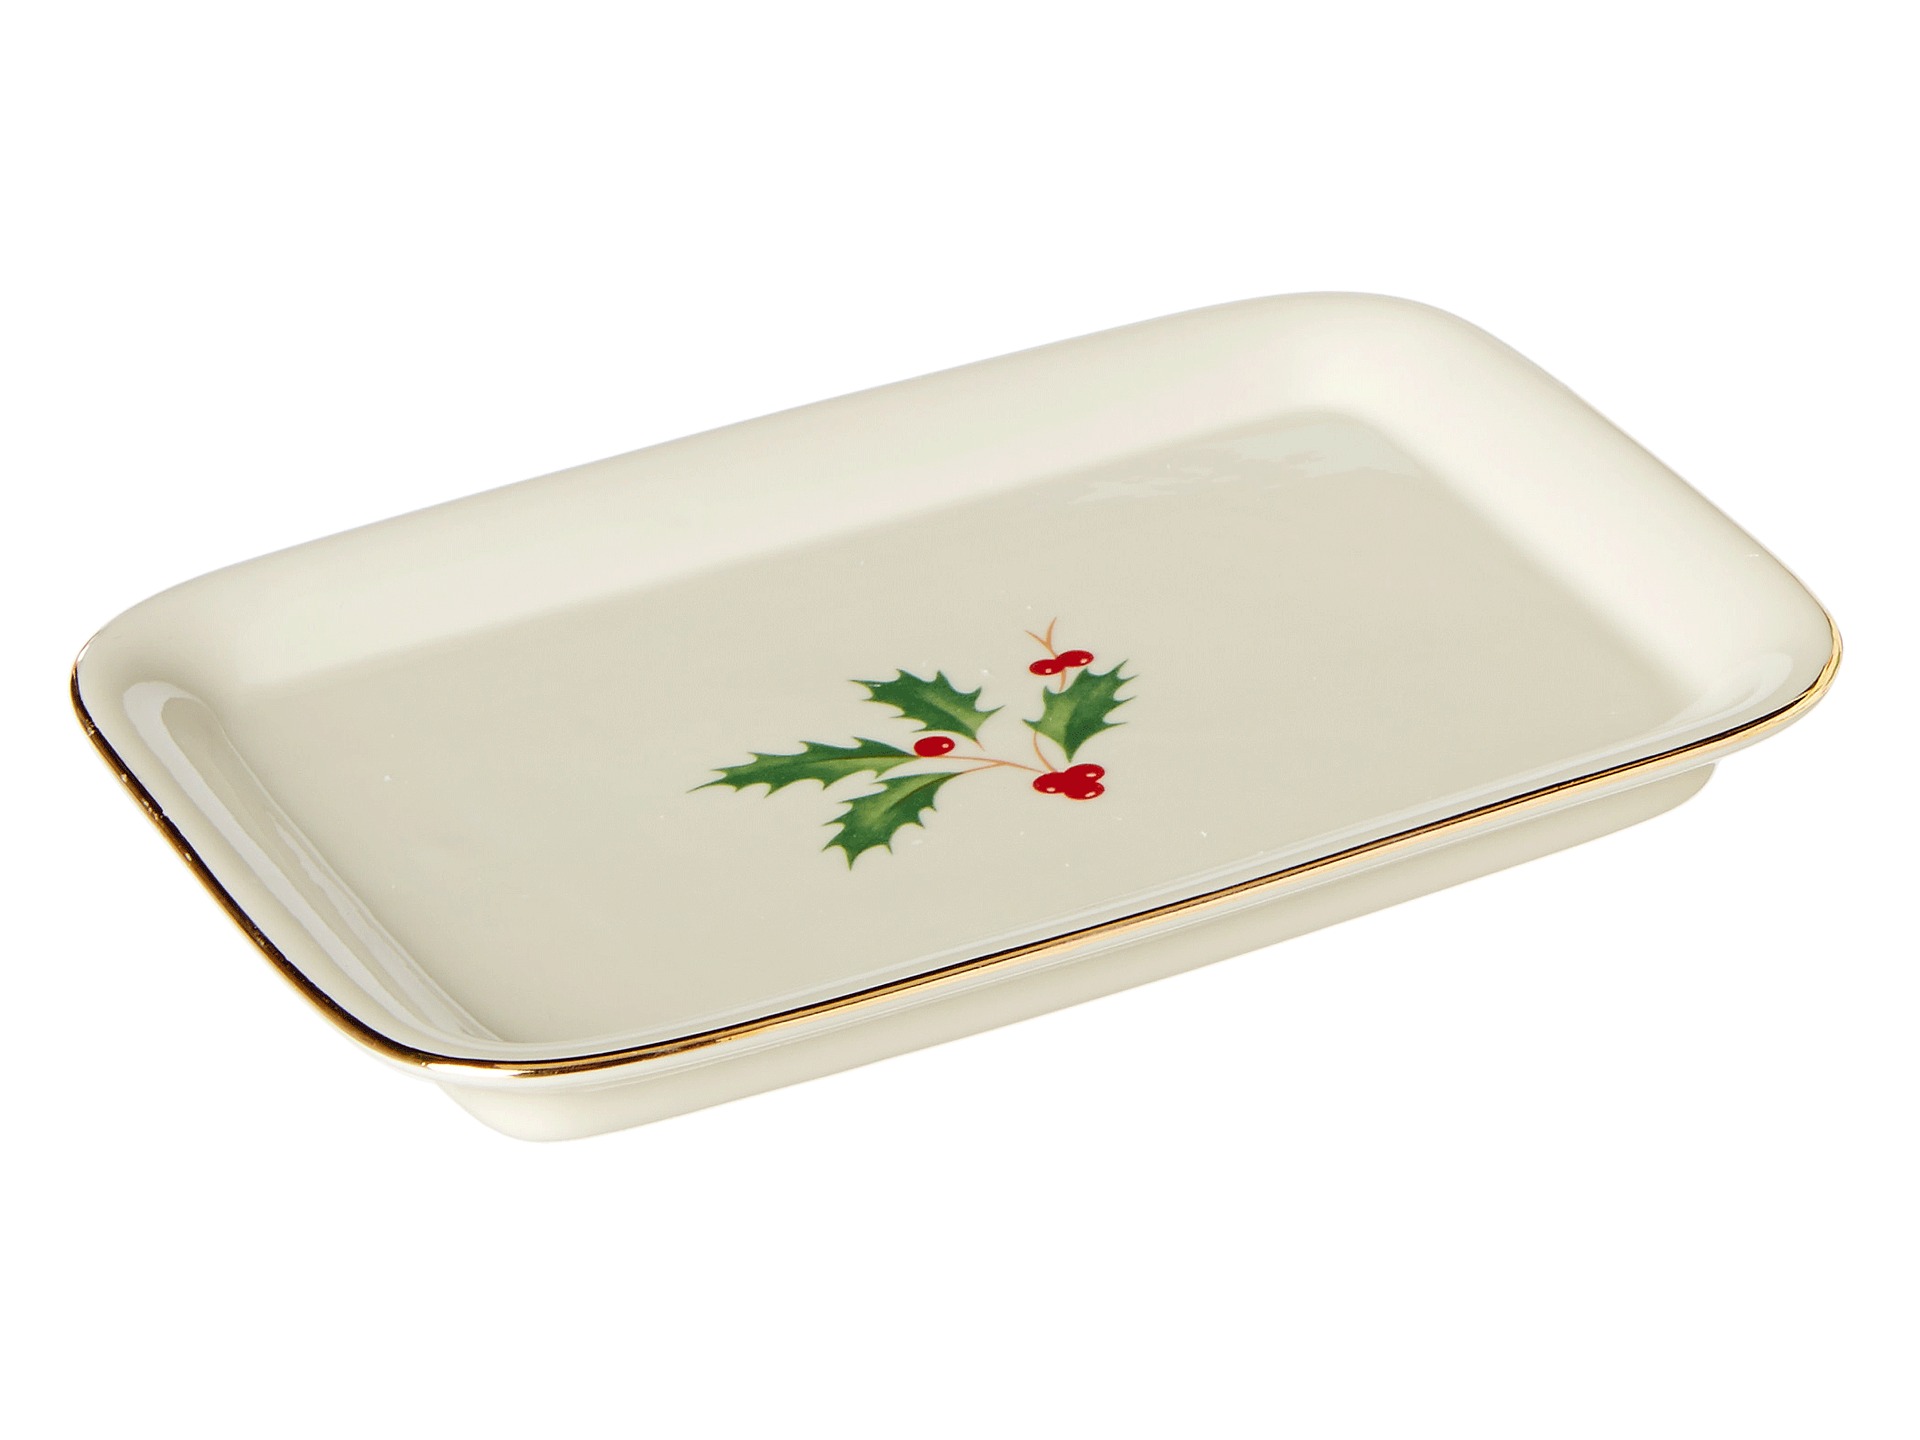 No results for lenox holiday covered butter dish ivory - Search Zappos.com